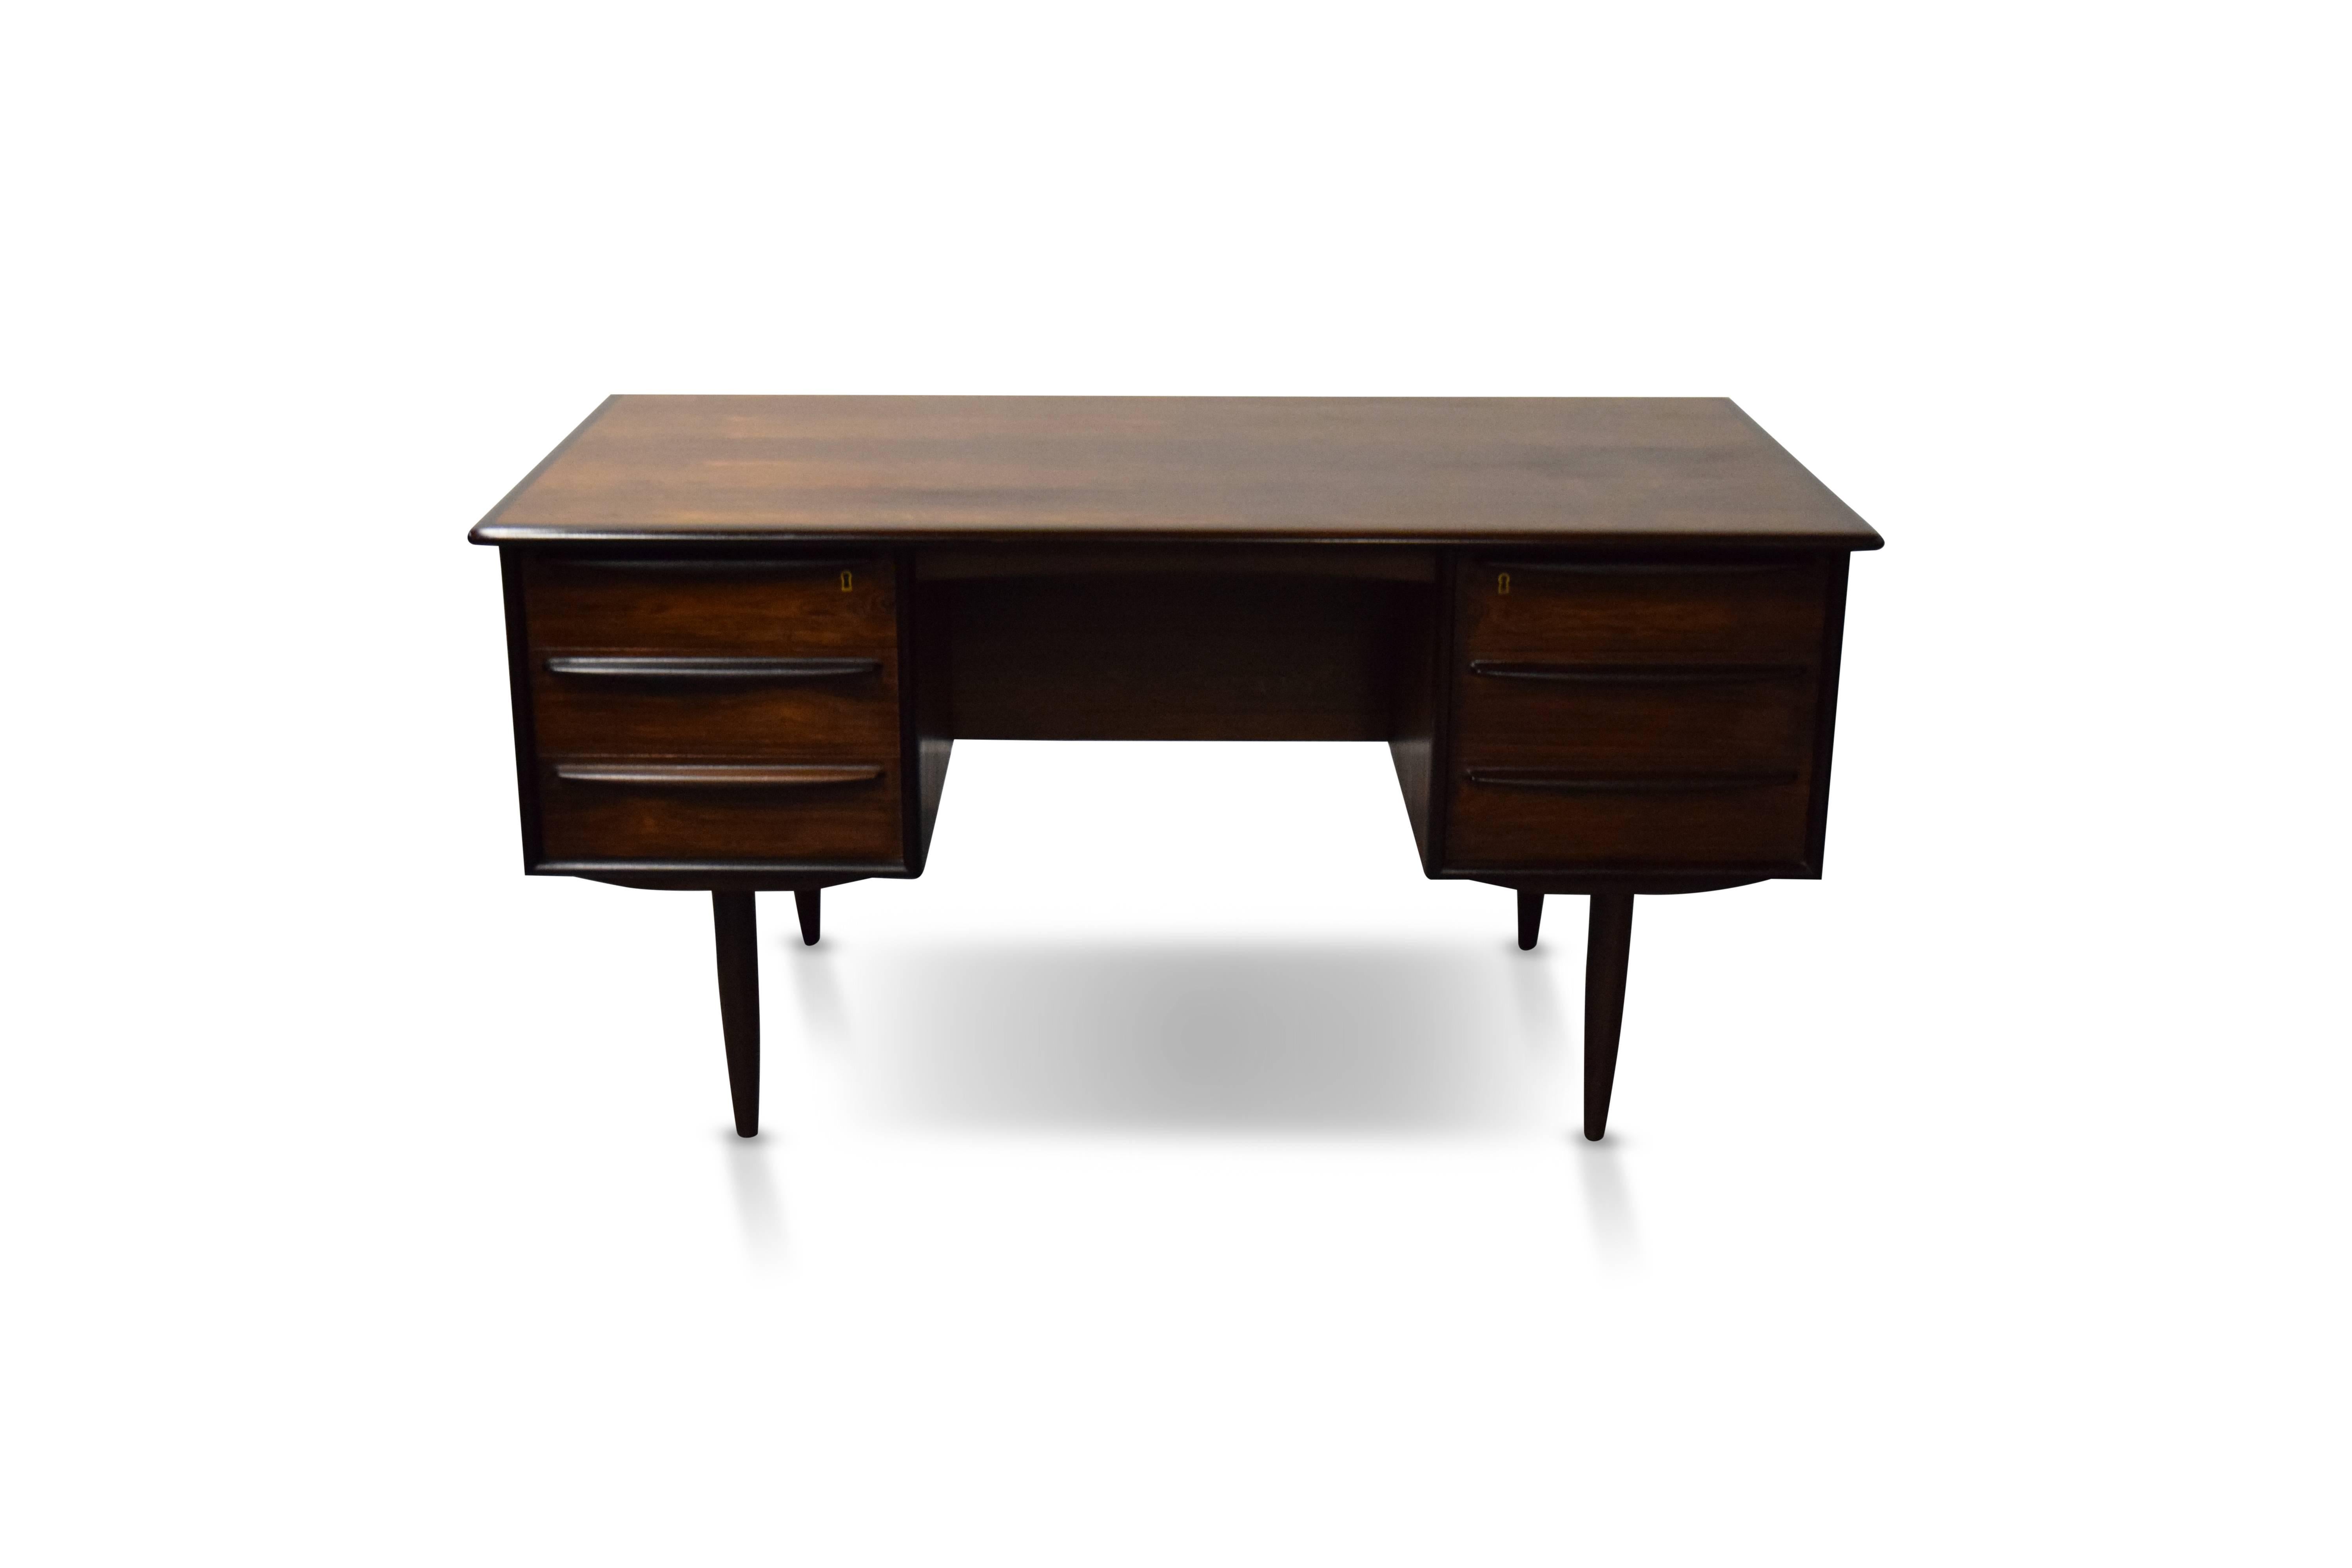 Brazilian rosewood Danish desk by Falster.

Desk comes with the two original brass keys.